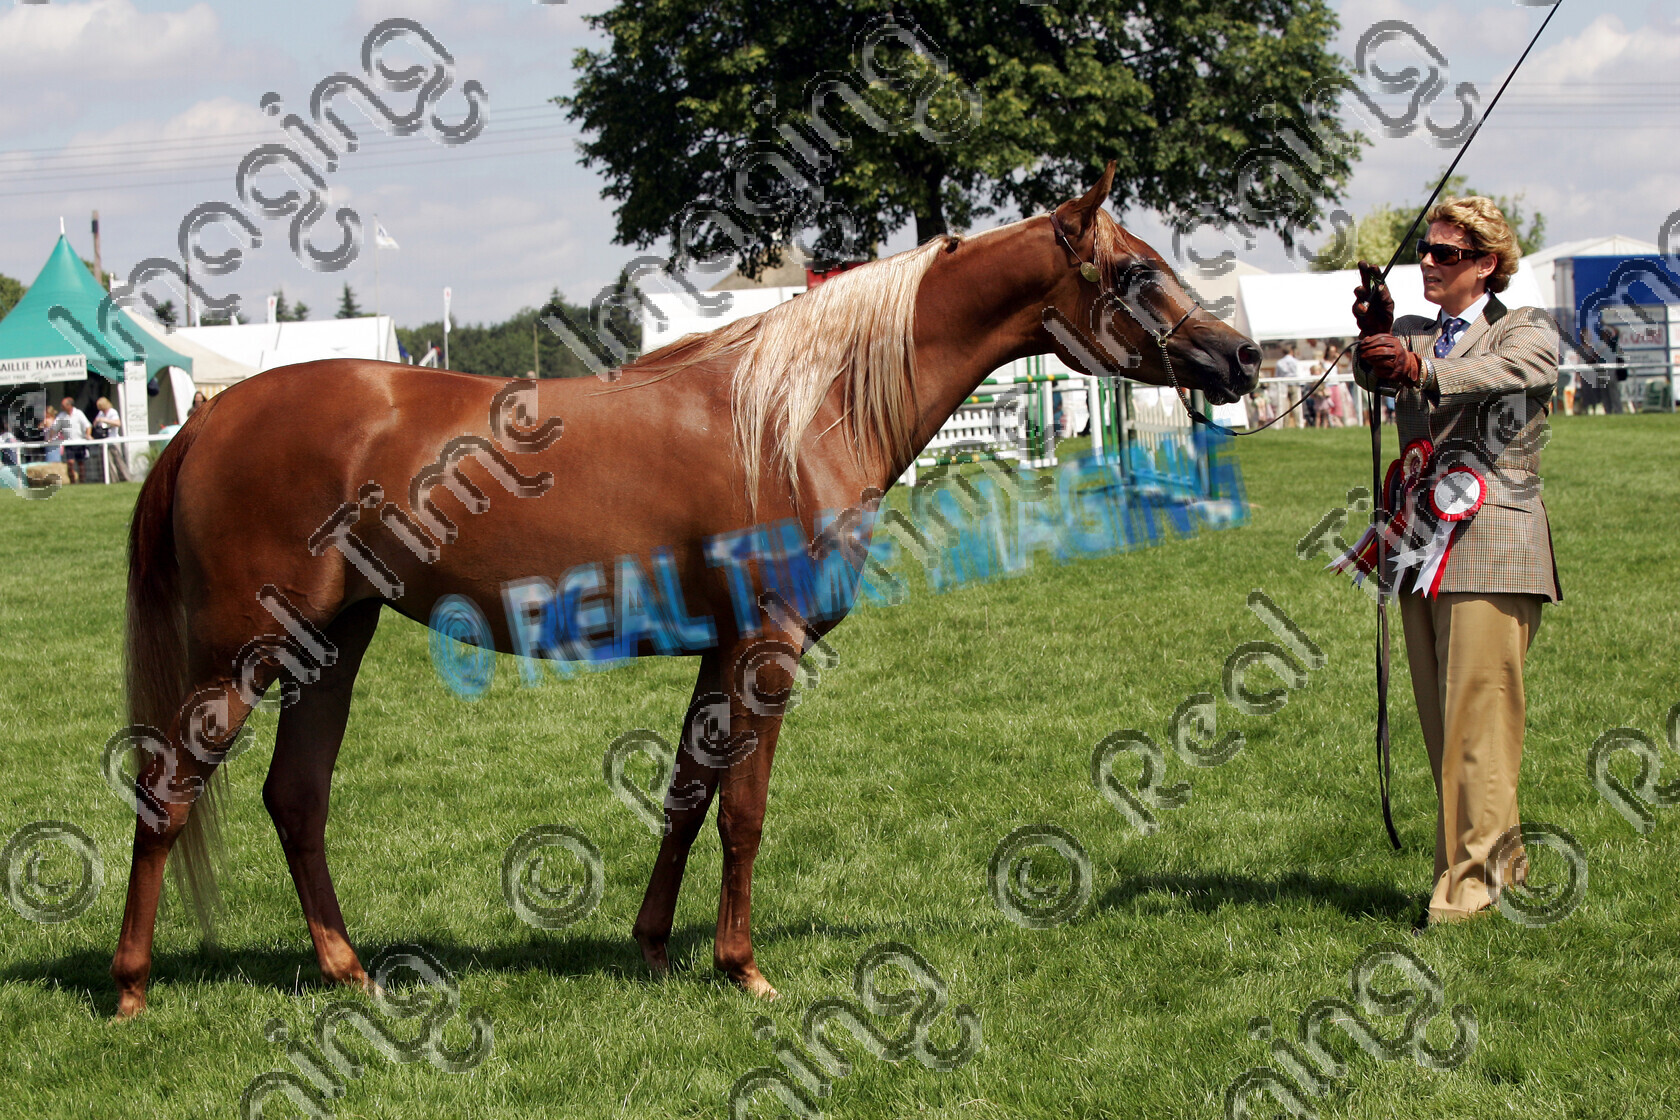 S06-28-3-151 copy 
 Keywords: The Royal Norfolk Show Wednesday 28 2006
pure bred arab in hand 145 KUBIARA chestnut mare
rosette rosettes prize winner champion championship first best standing stood horse pony showing June